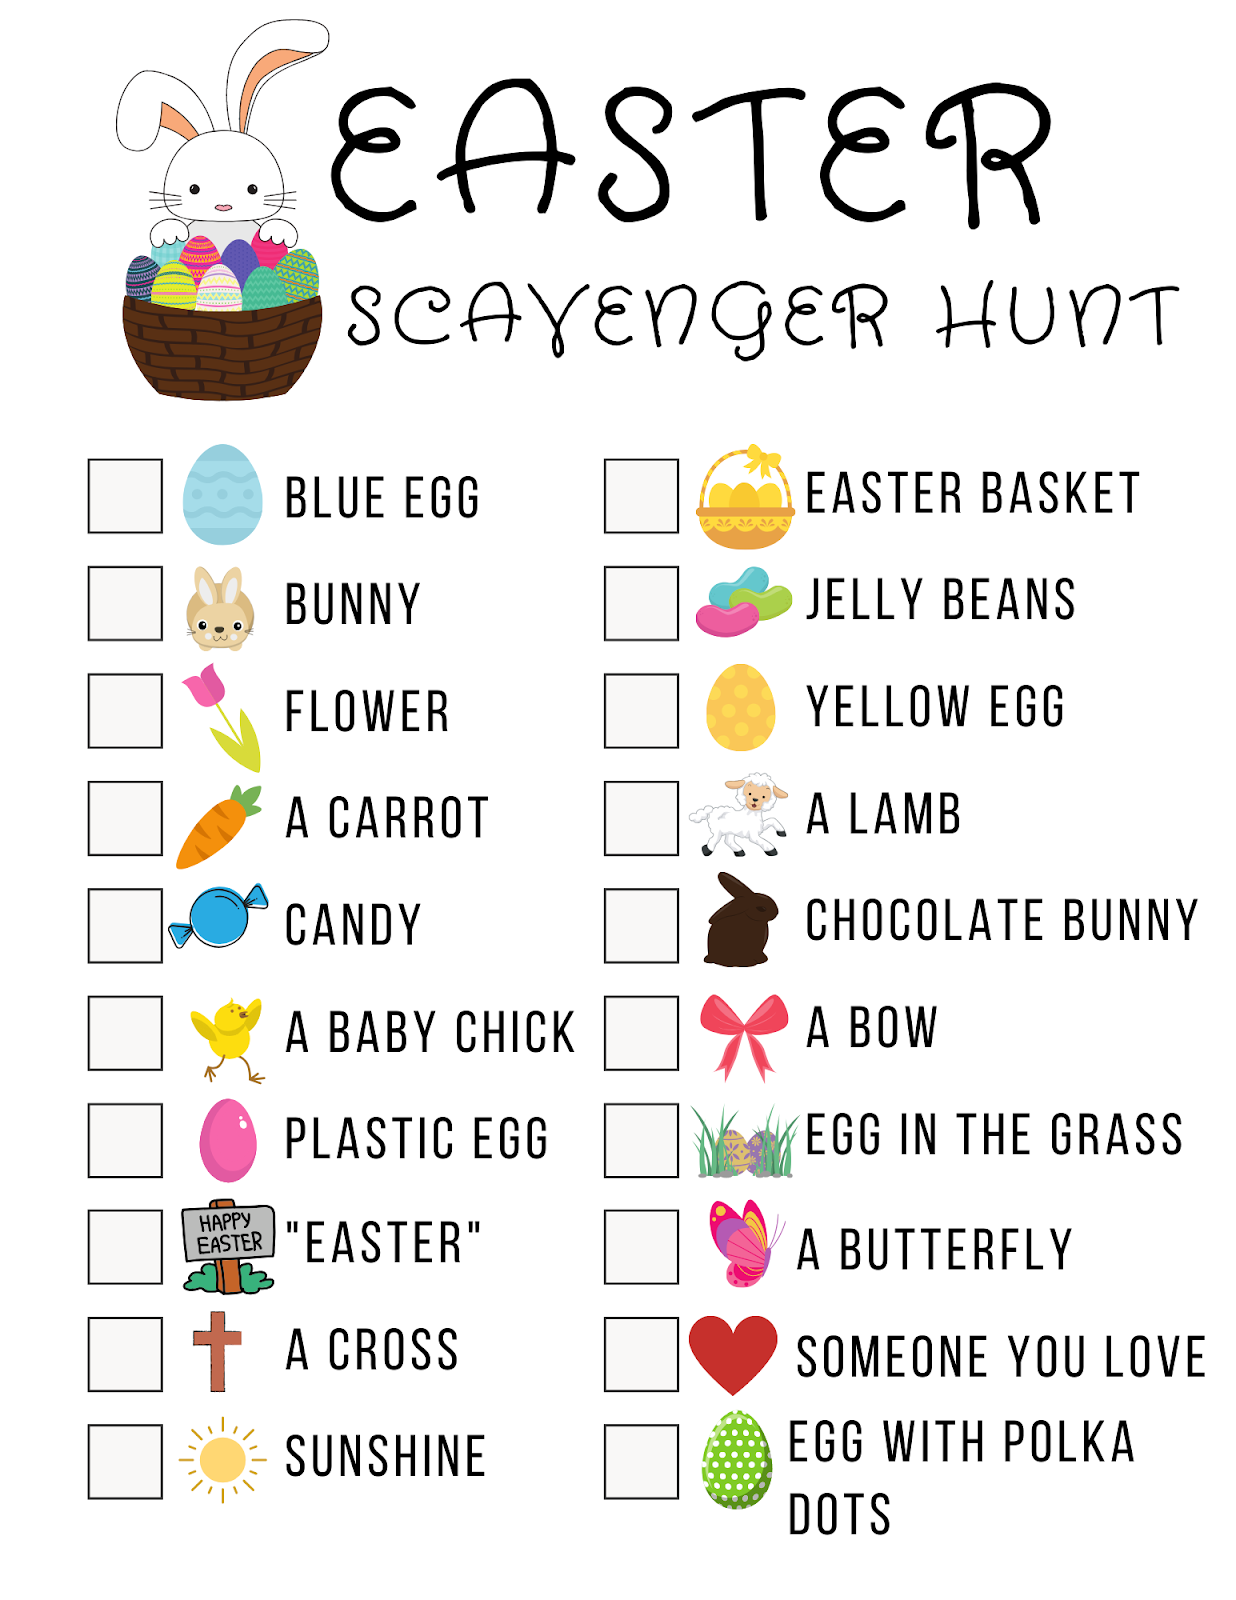 How to Plan a Fun Easter Egg Hunt at Home